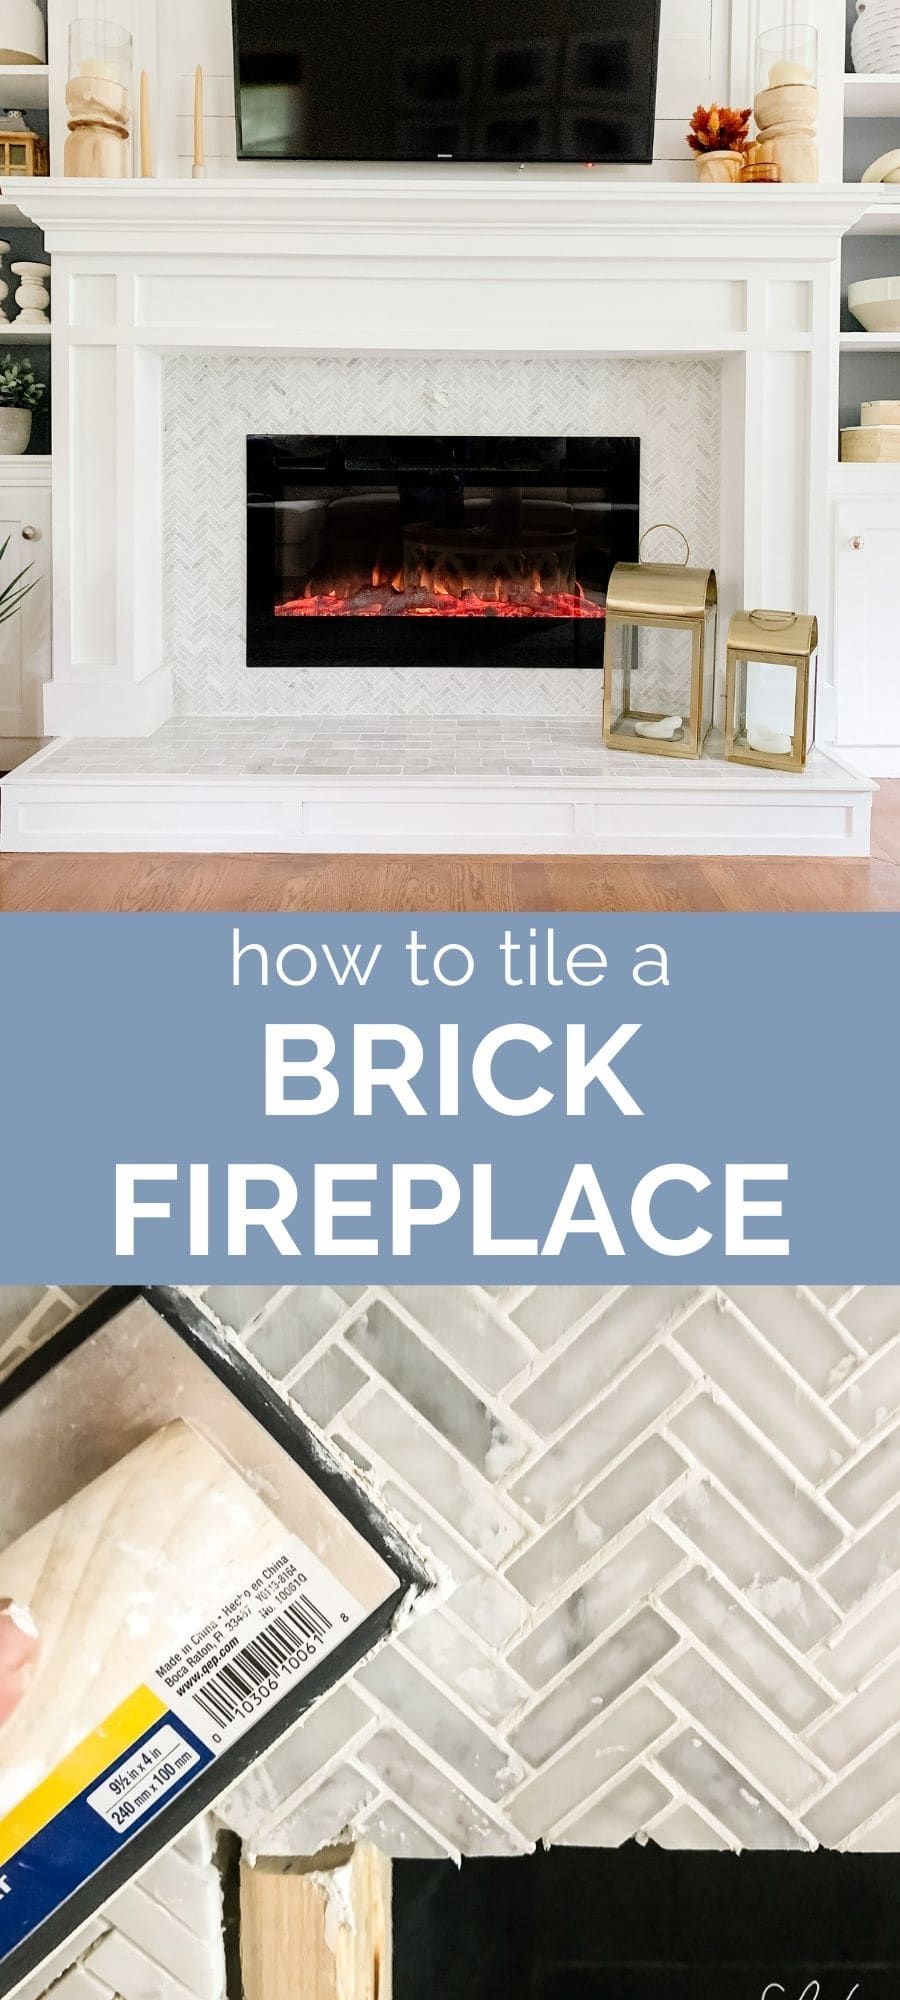 How To Tile A Brick Fireplace Jenna, How To Replace Tile Fireplace With Stone